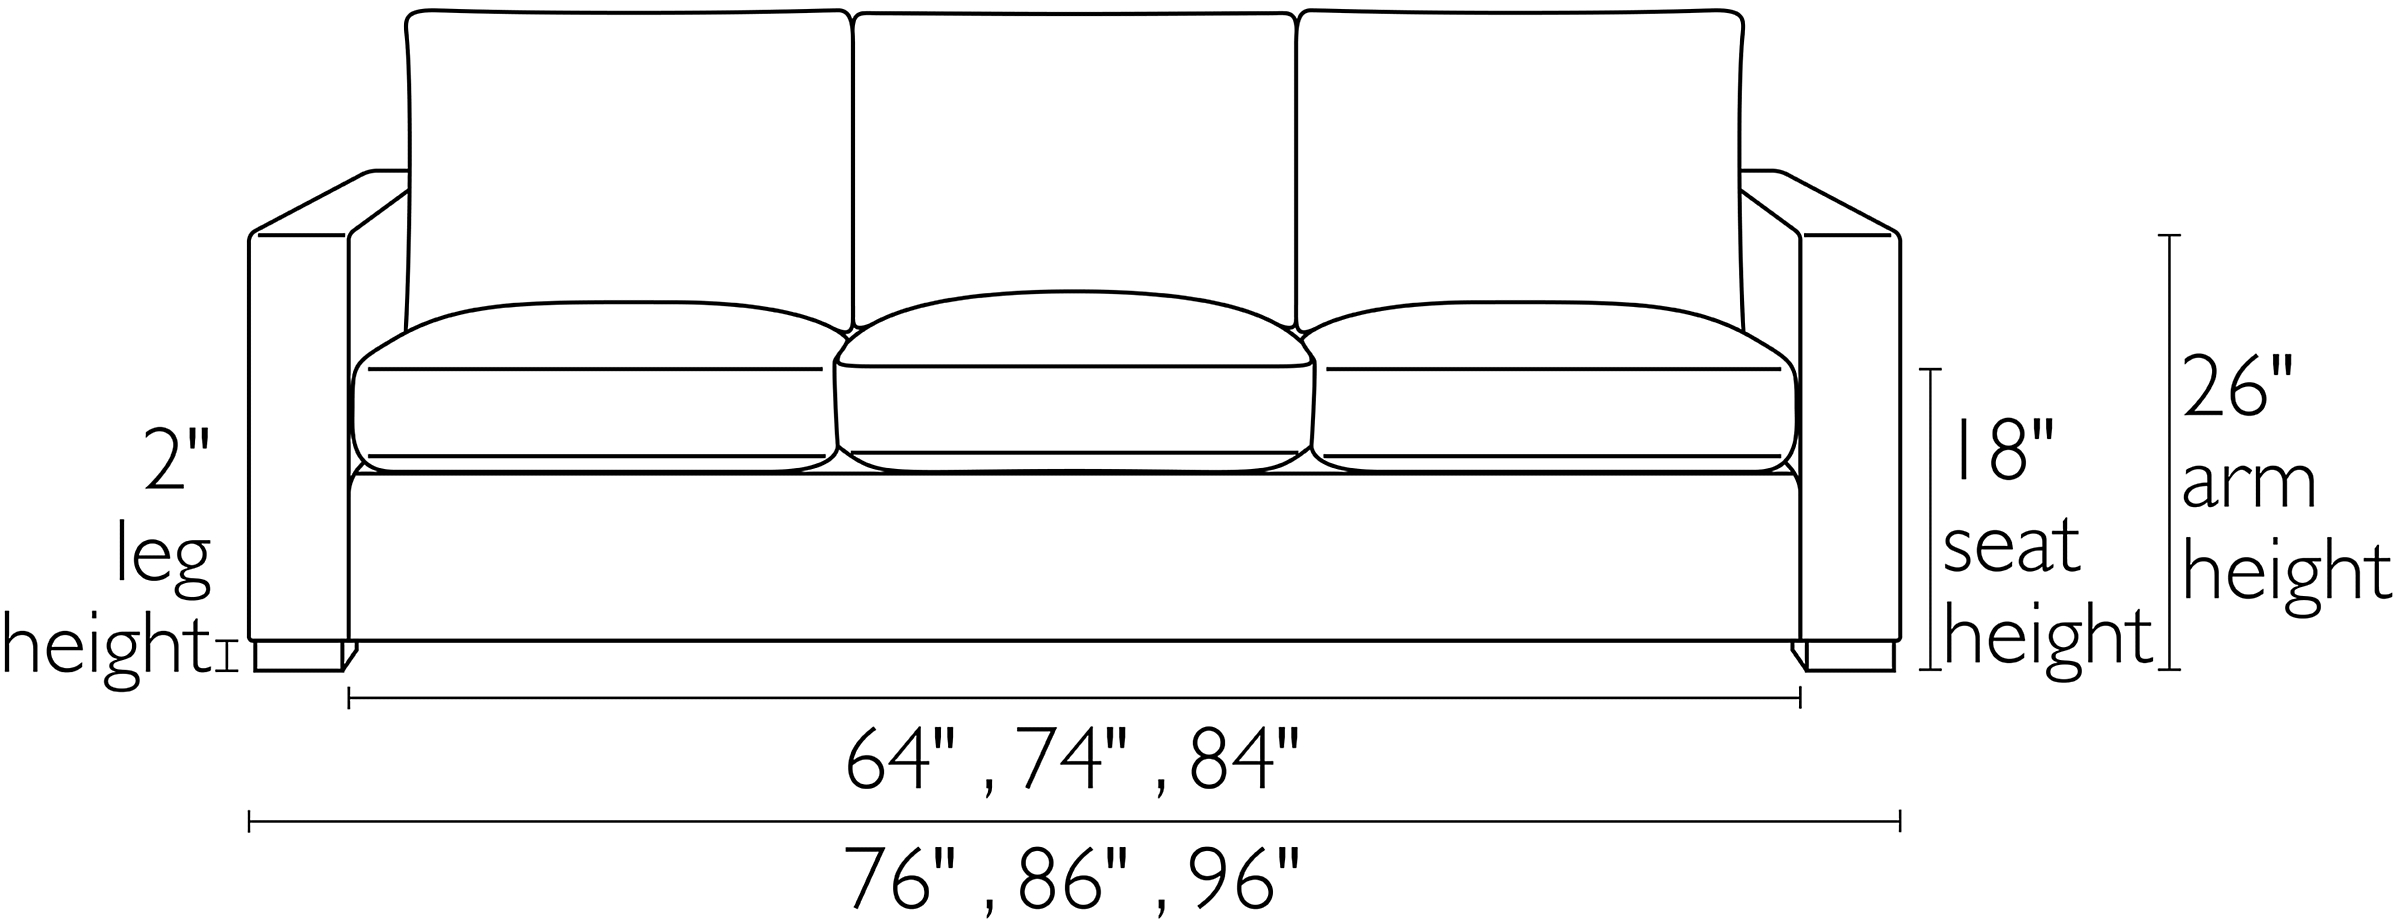 Morrison Sofa's Front Dimension Drawings.